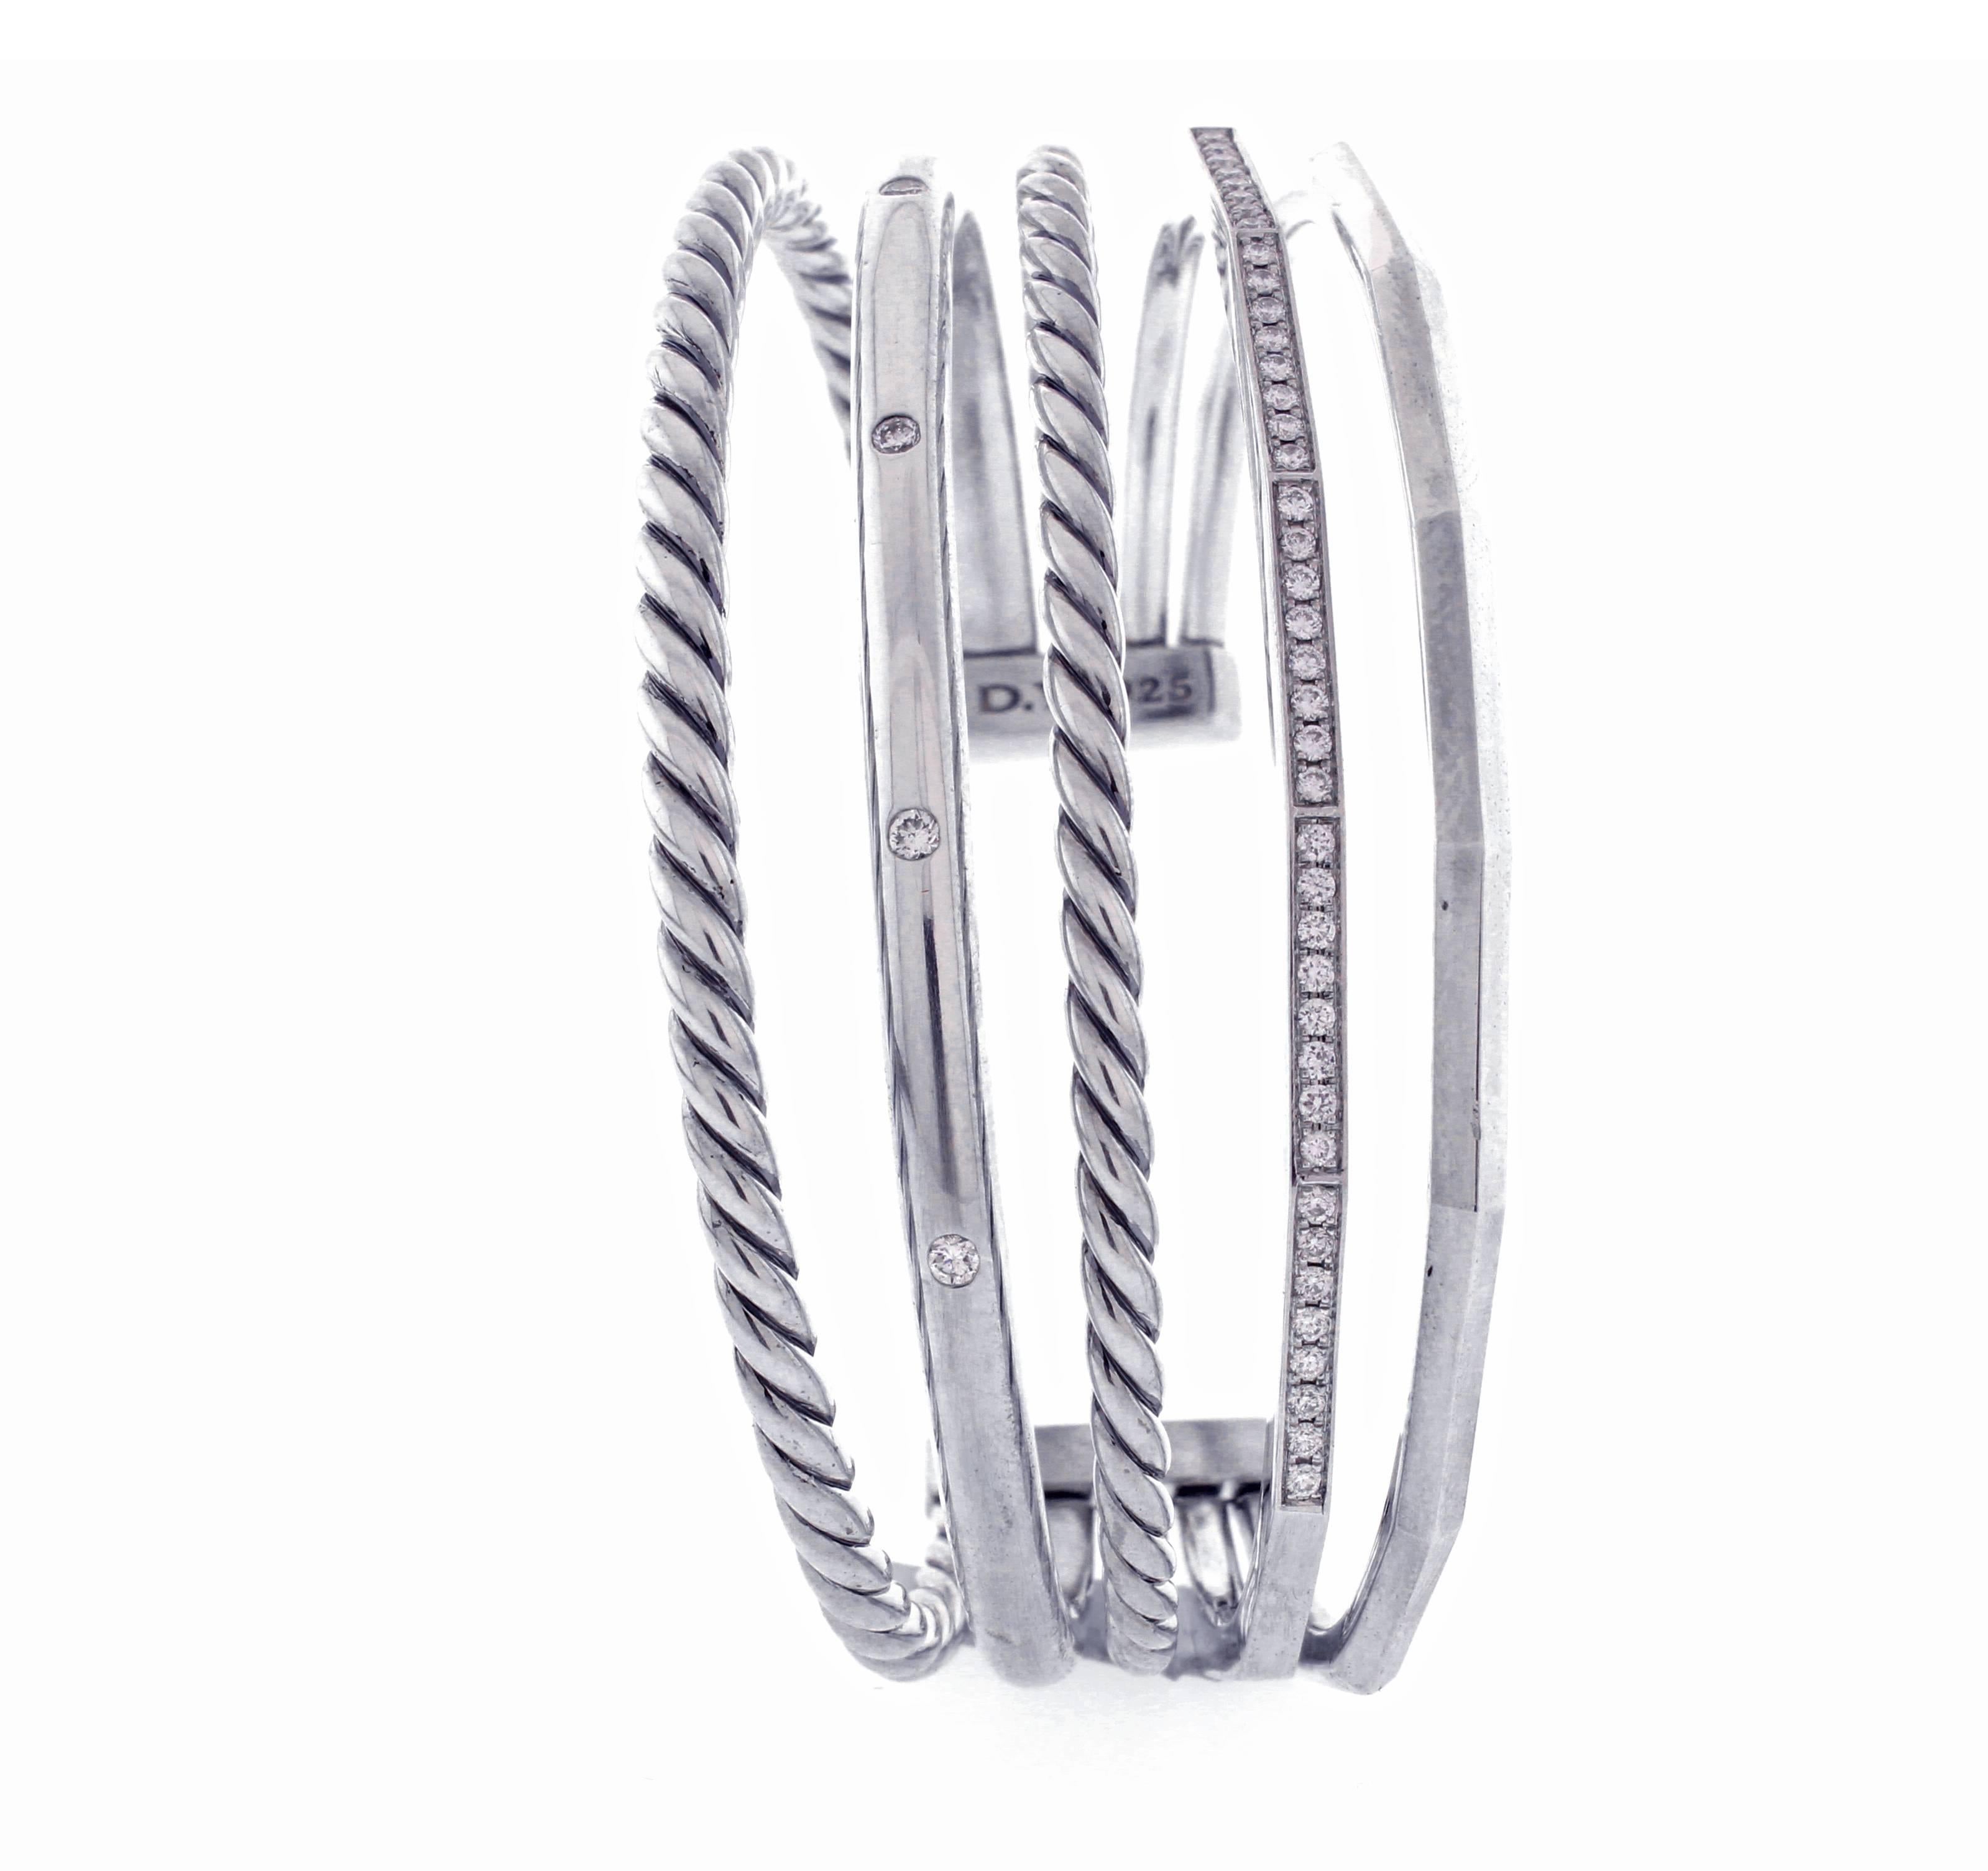 PRODUCT DETAILS
From David Yurman, his five  stax open cuff bracelet in sterling silver. The bracelet features pavé diamonds
weighing .50 ct. t.w.
2.28